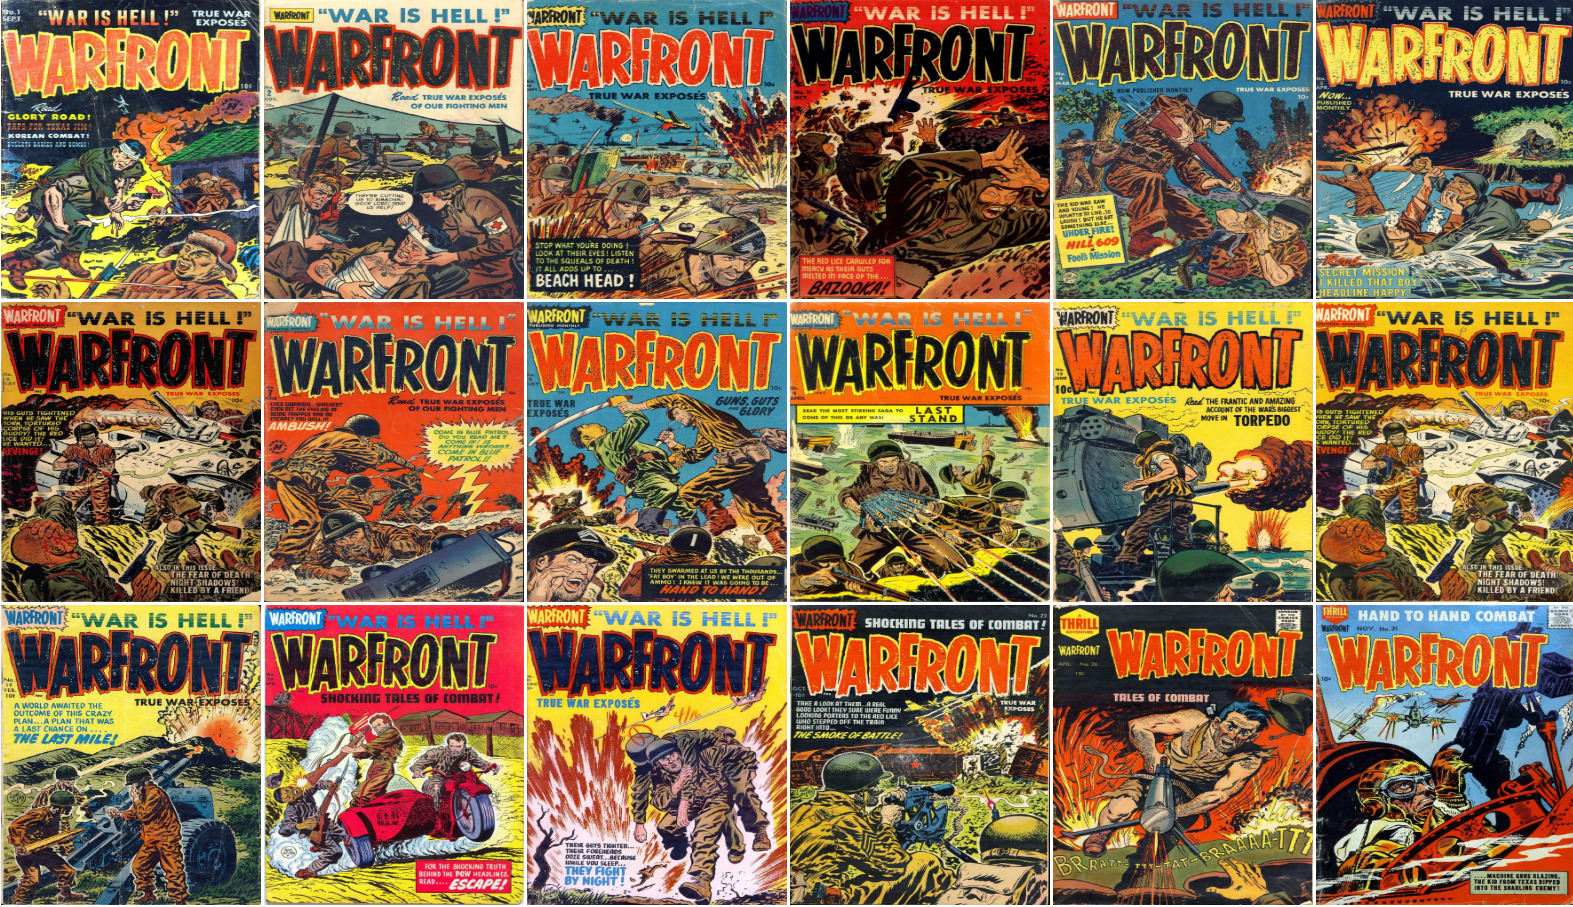 1951 - 1958 Warfront Comic Book Package - 20 eBooks on CD